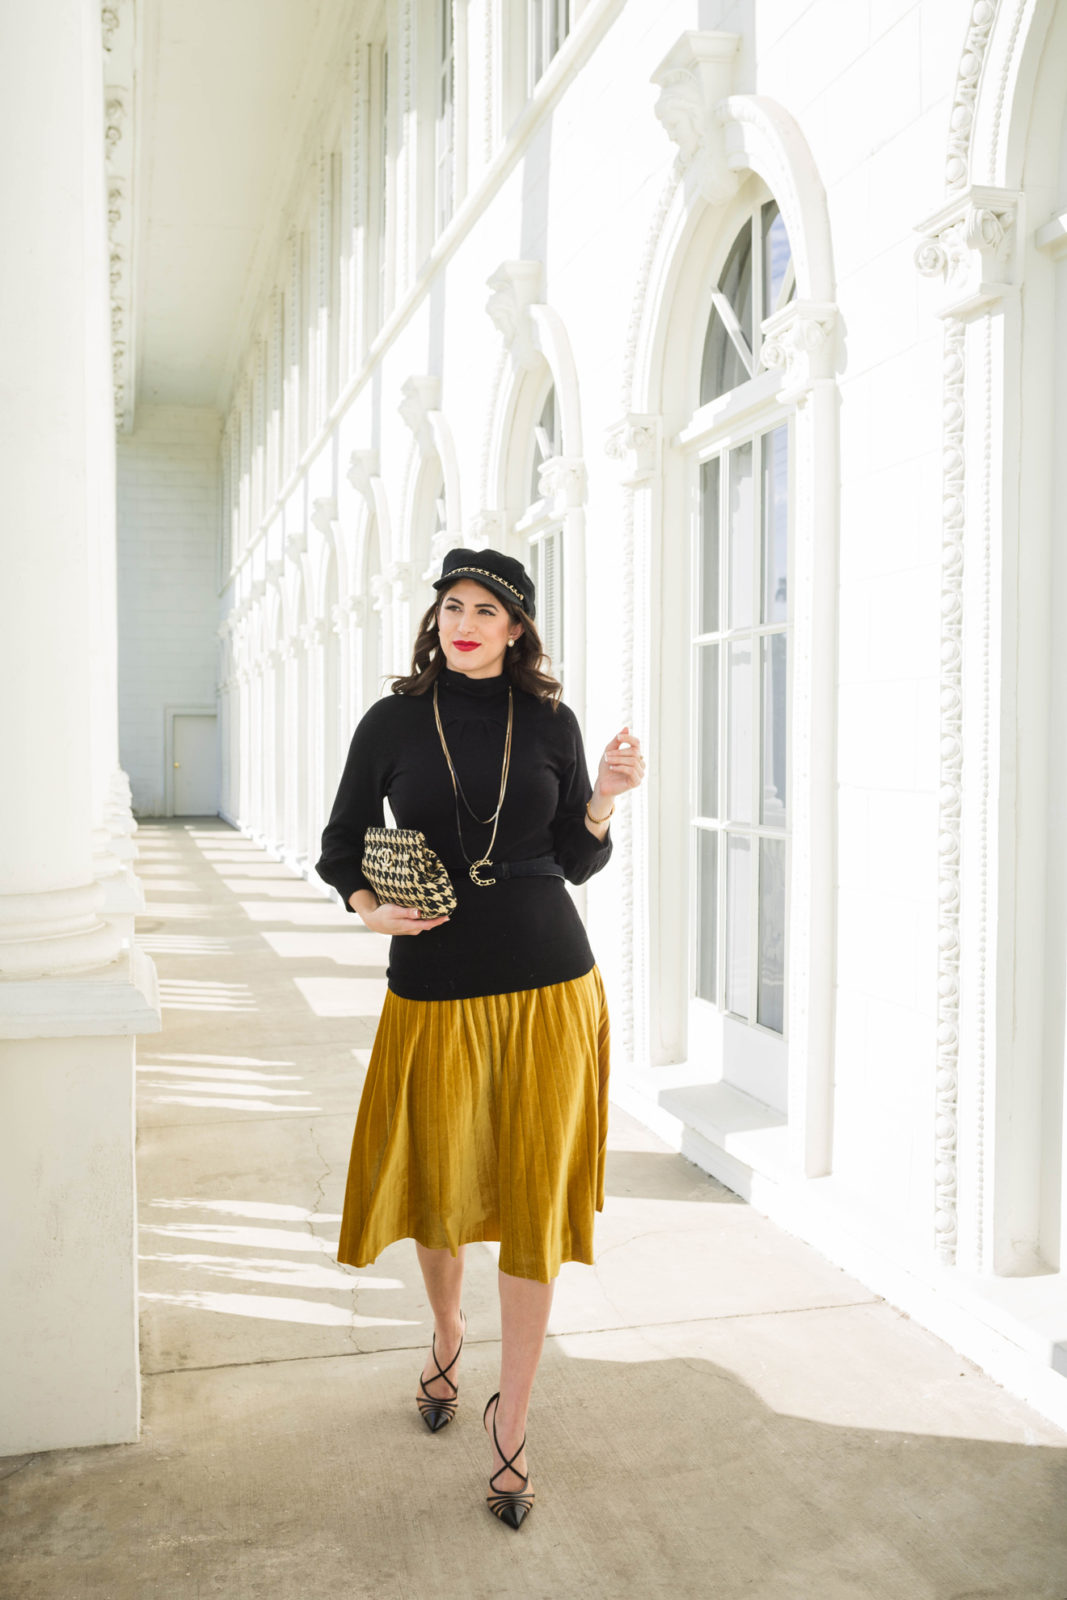 One Velvet Pleated Skirt, Two Ways by Los Angeles Fashion Blogger Laura Lily, Velvet SheIn Pleated Skirt, 